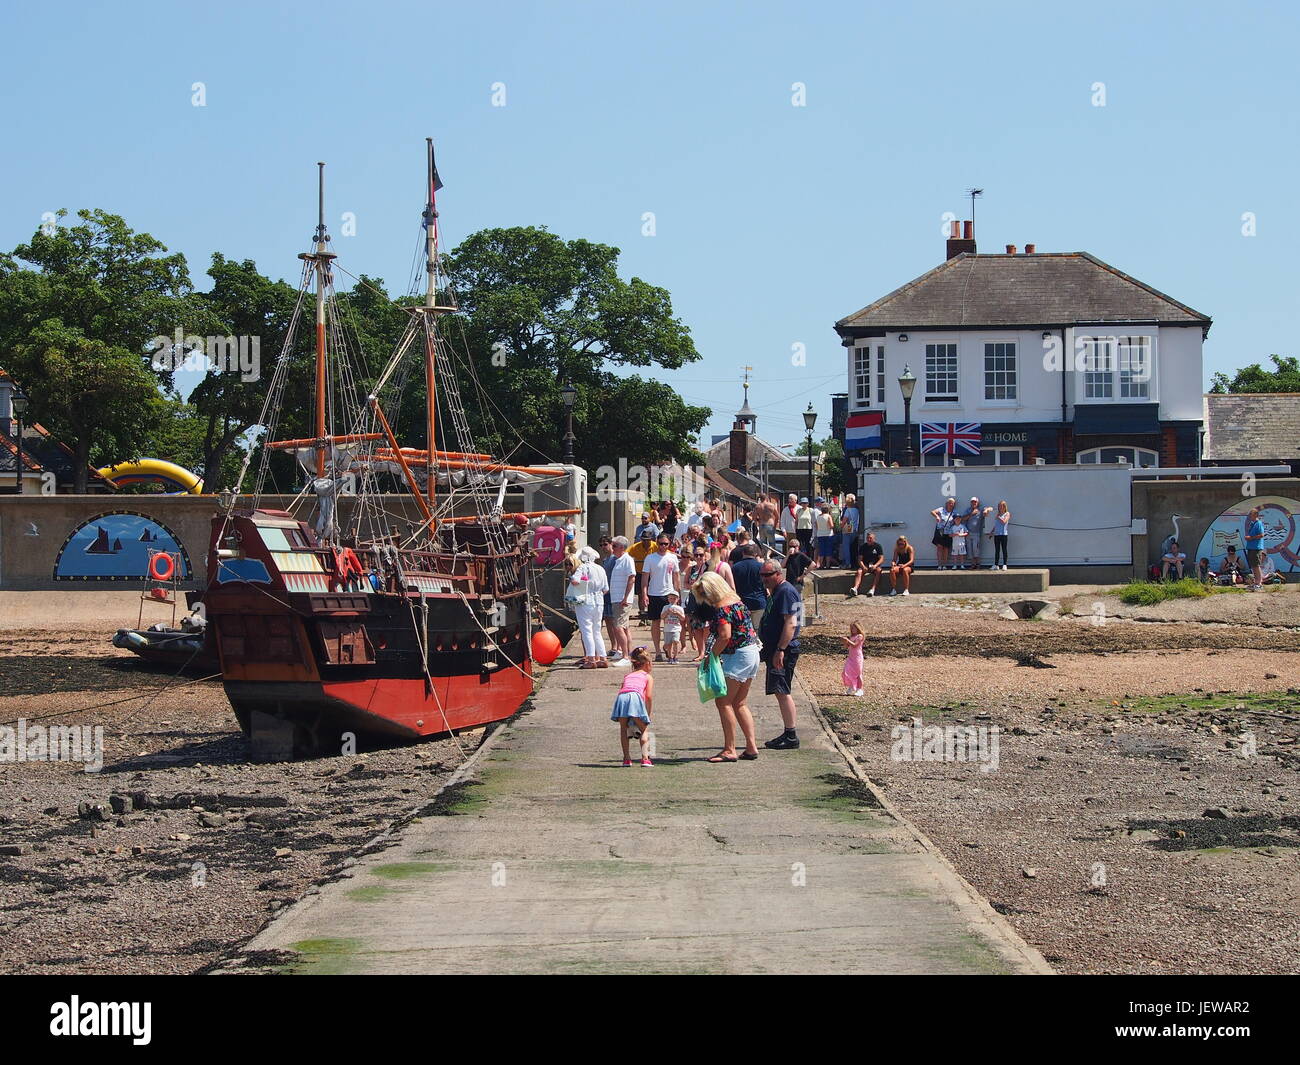 Causeway at Queenborough with replica Galleon ship and the Old House at Home pub in the distance. Stock Photo